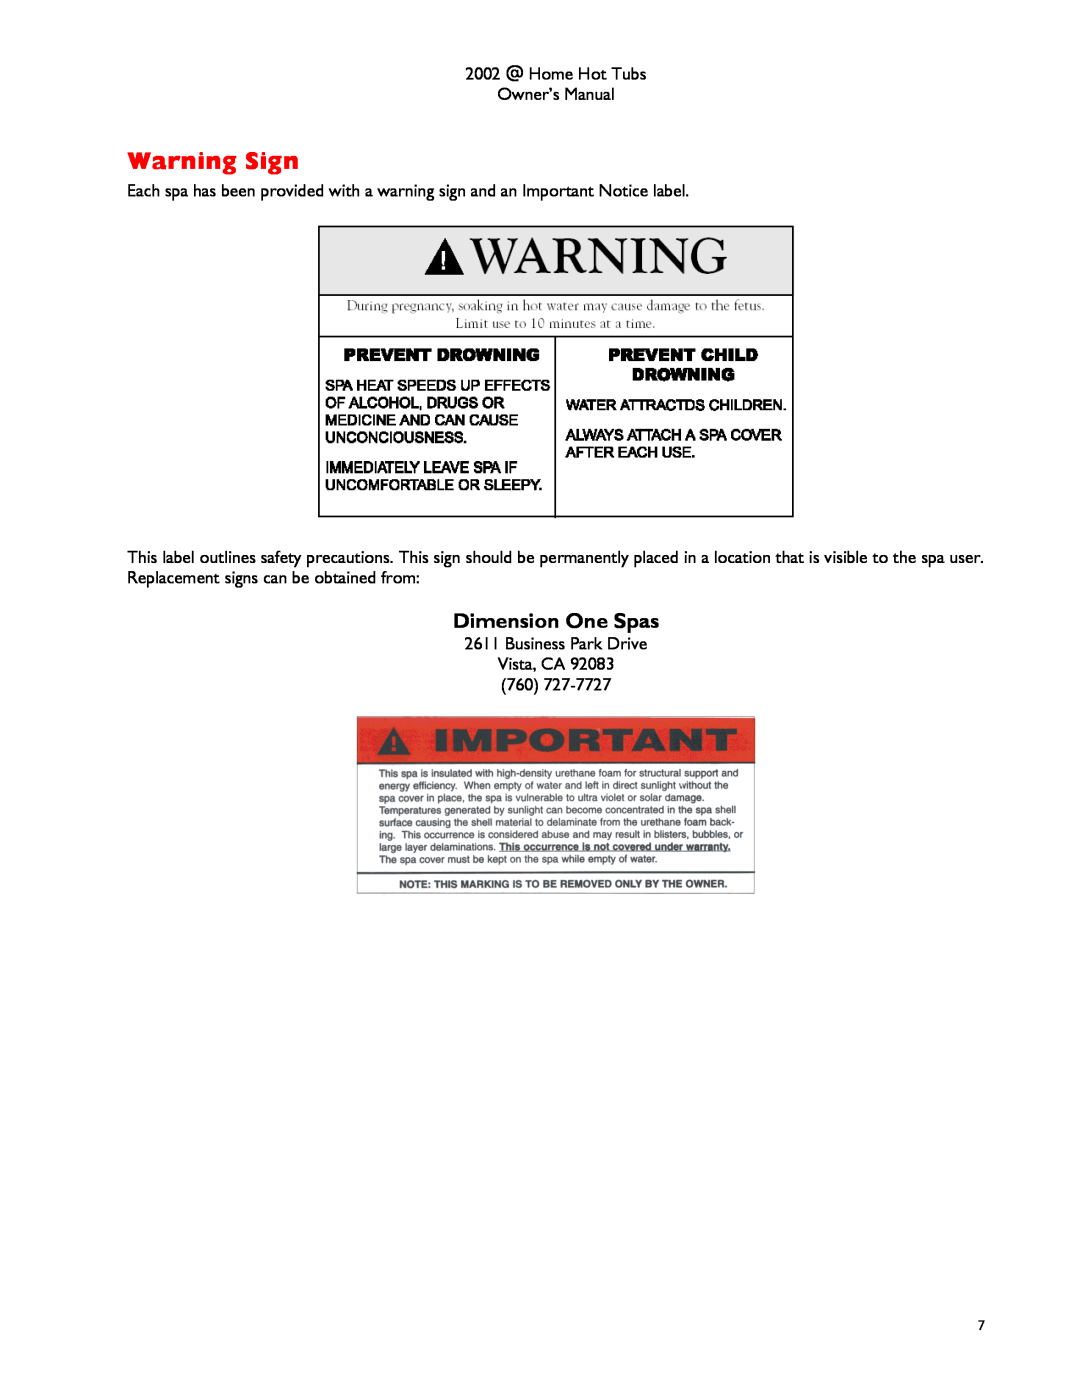 Dimension One Spas Cove, Dream HP manual Warning Sign, Dimension One Spas 